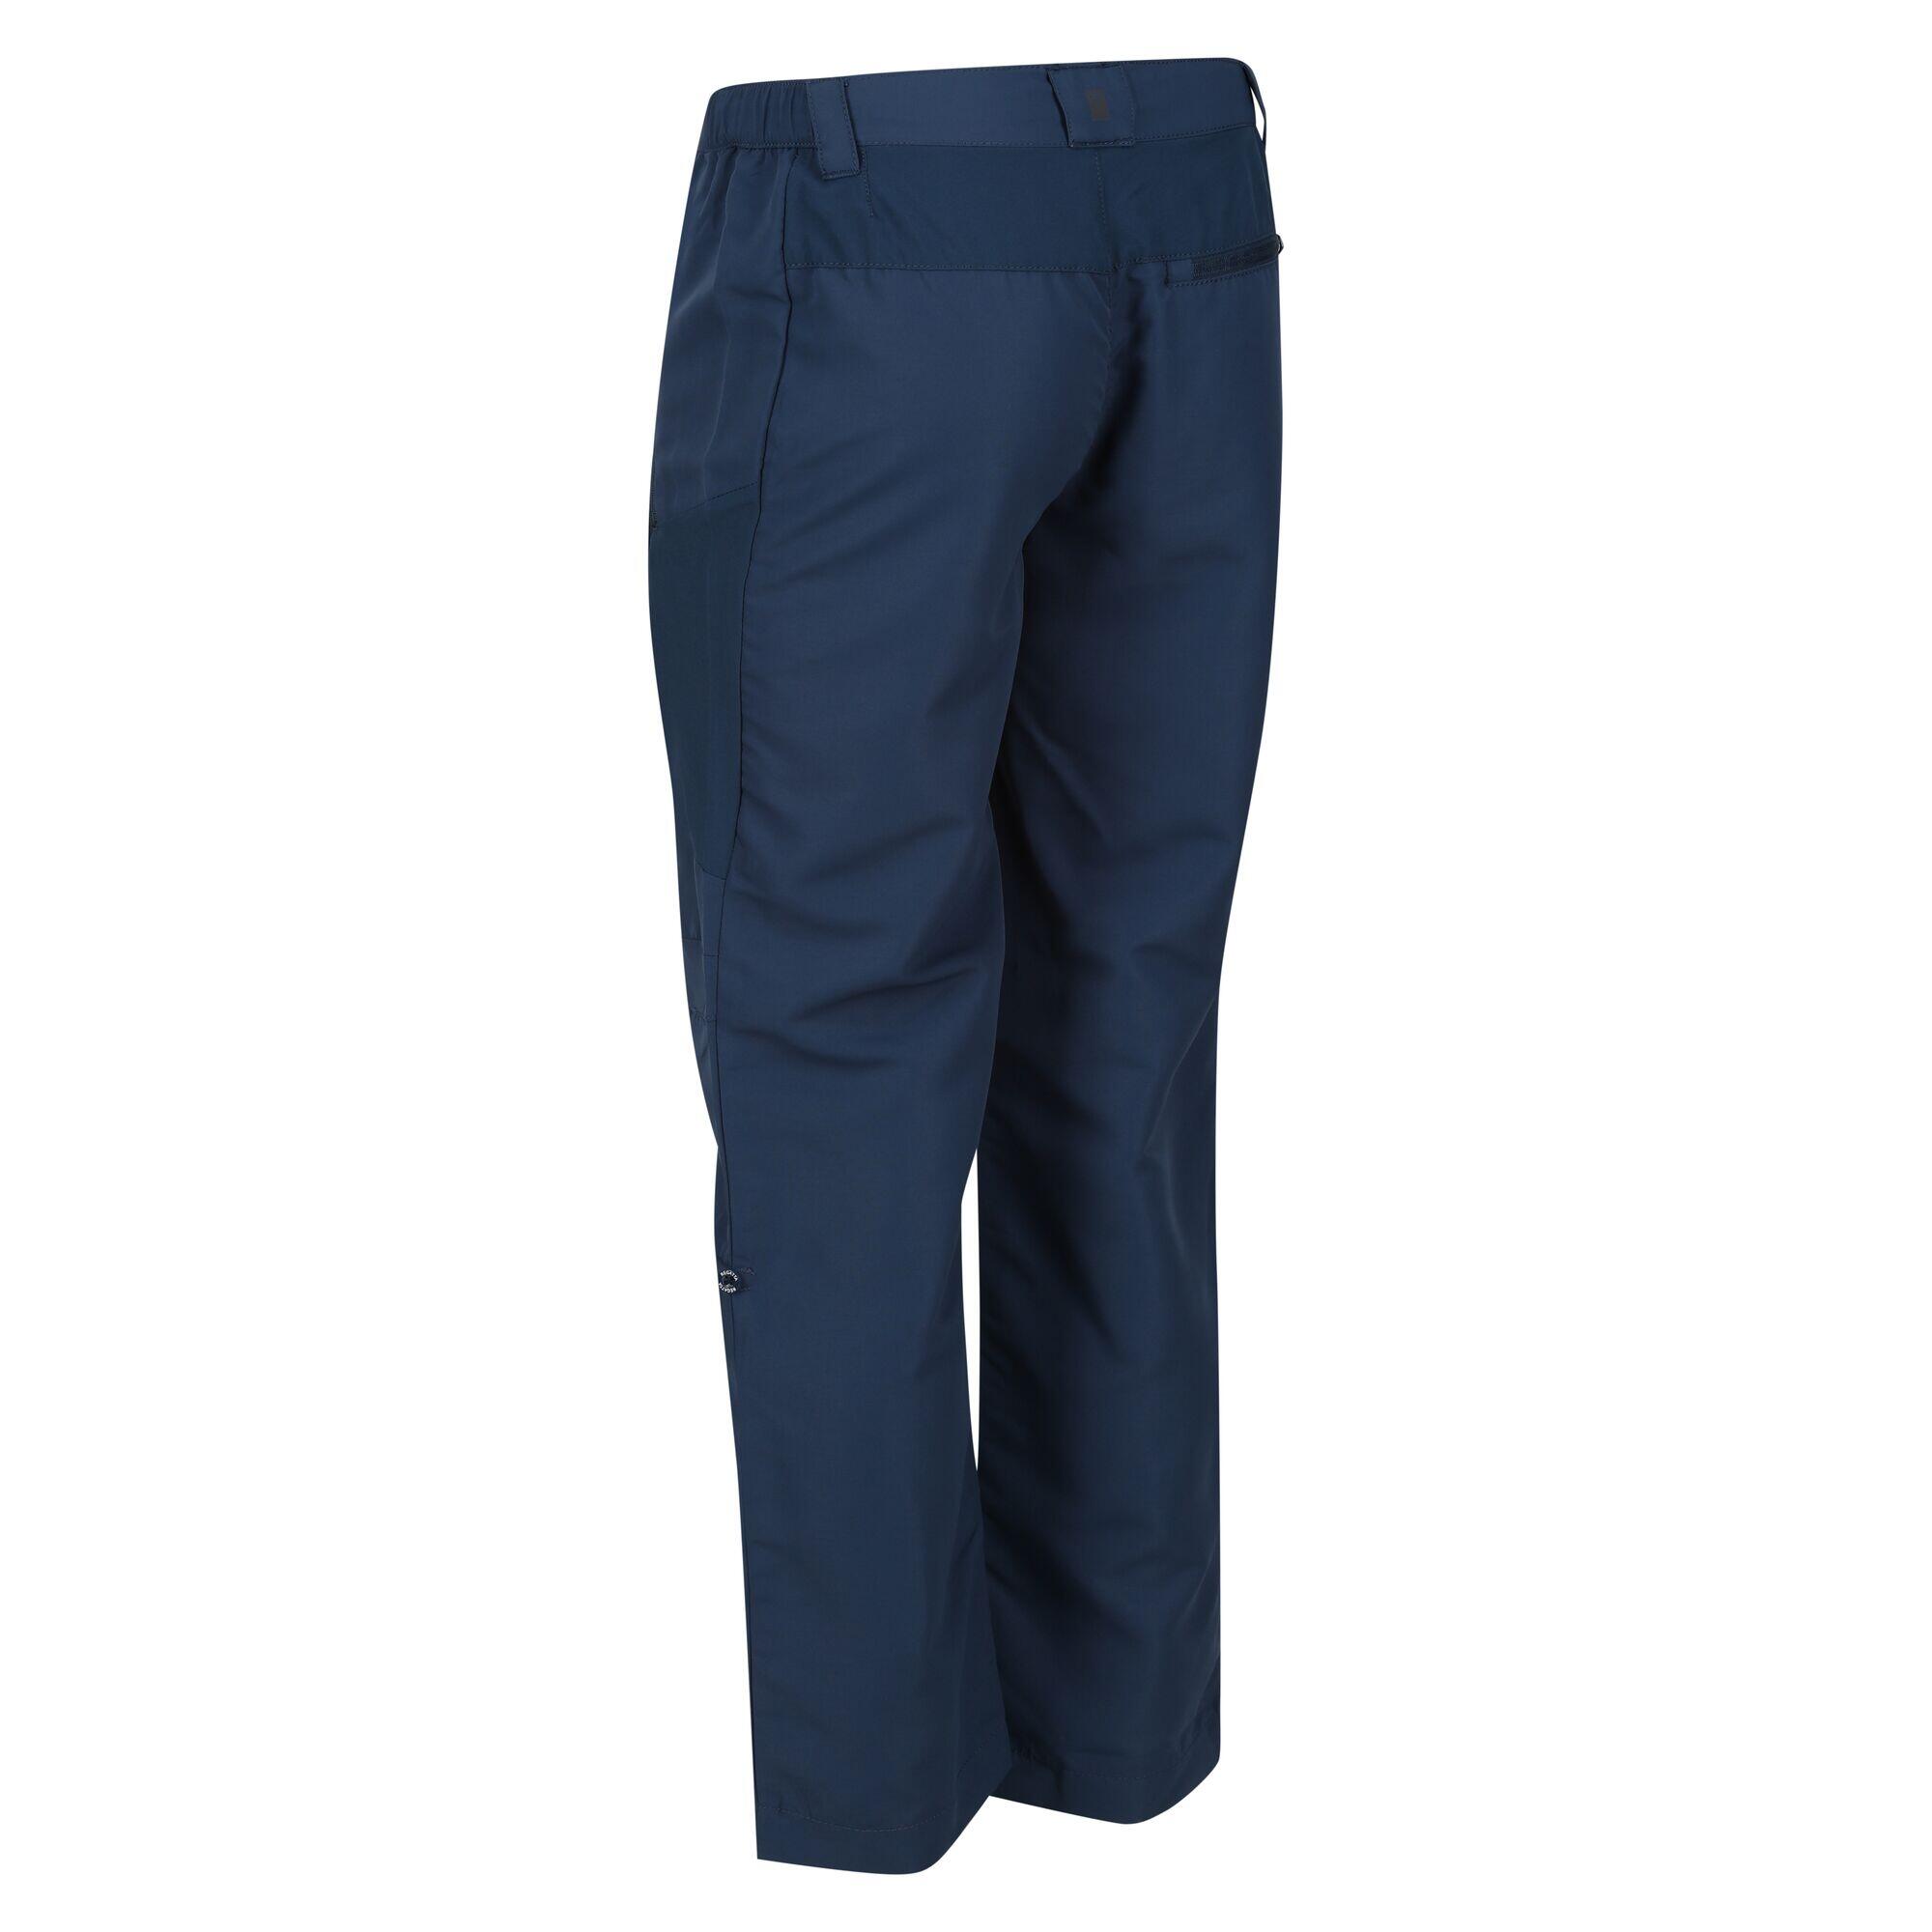 Childrens/Kids Sorcer VI Hiking Trousers (Blue Wing) 4/5